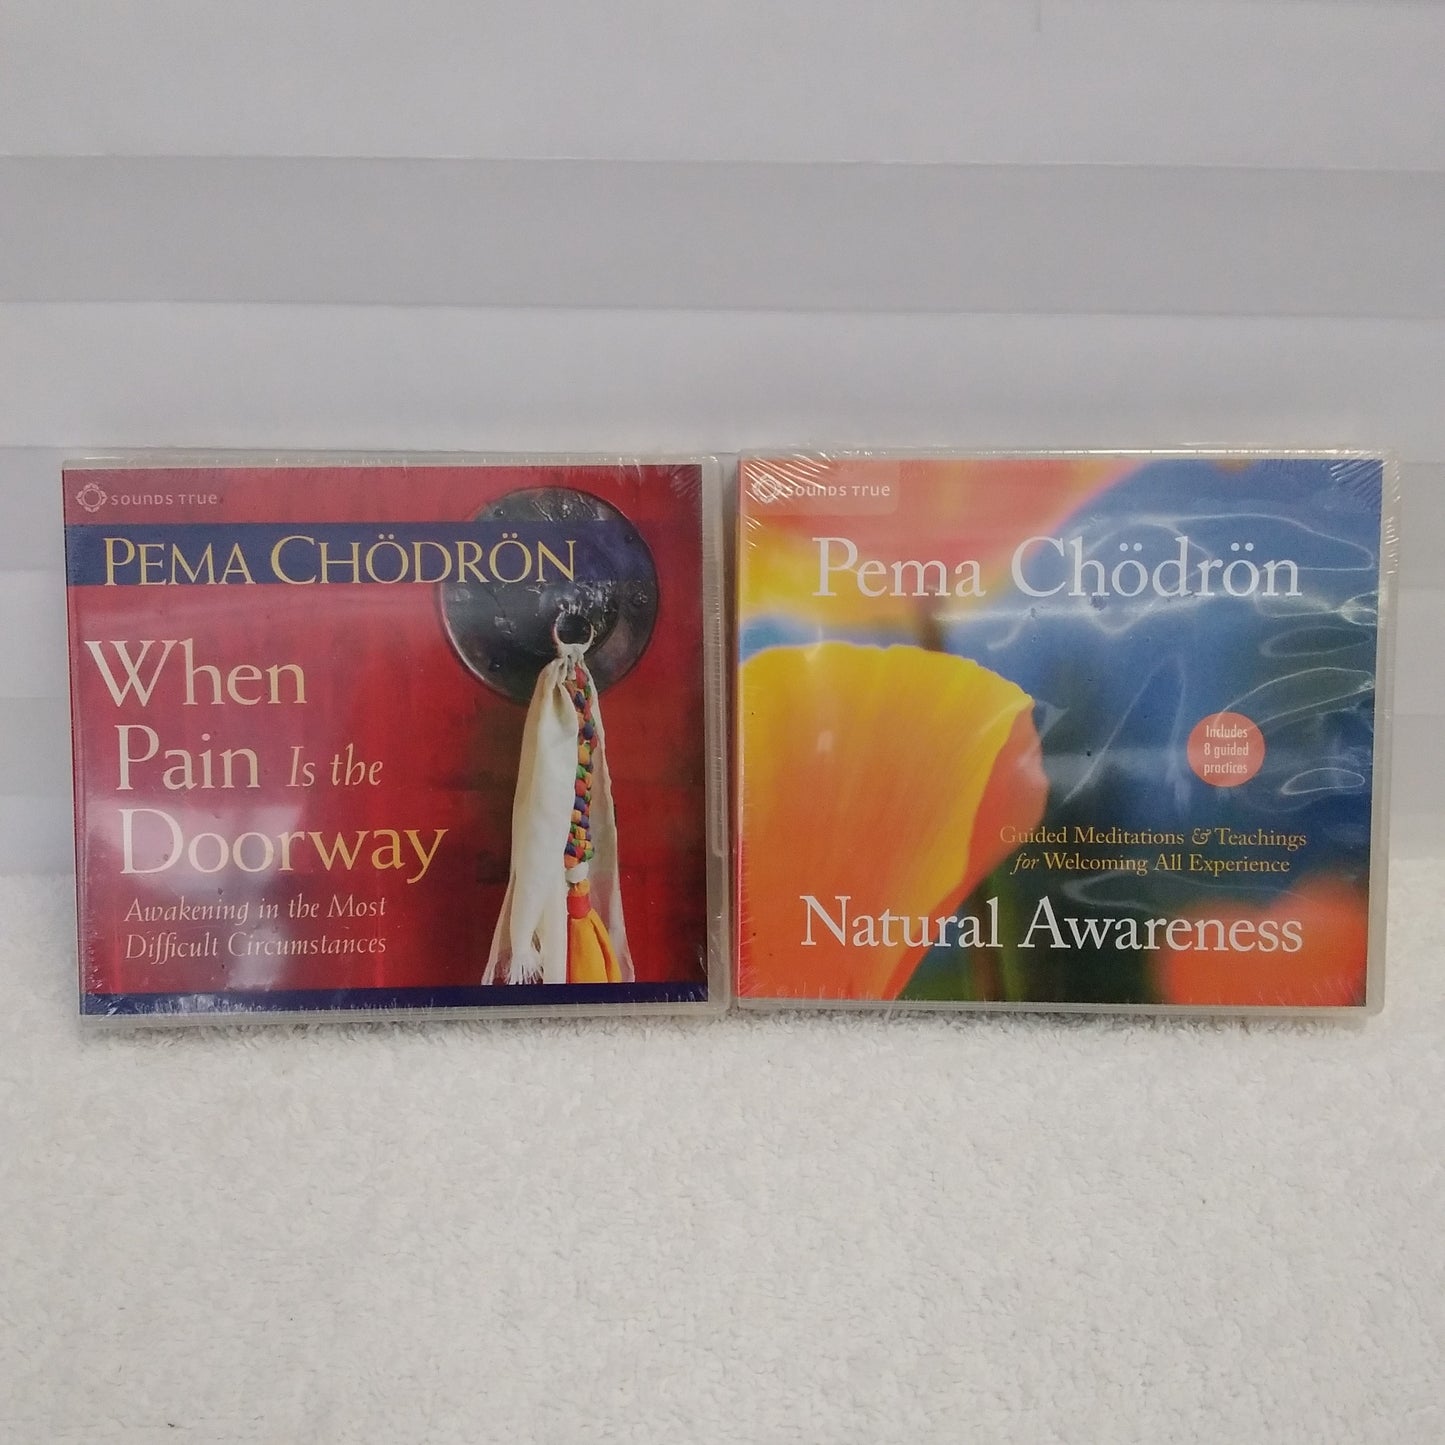 NIB - Natural Awareness & When Pain is the Doorway by Pema Chodron - Meditation CD Set (6 CD's Total)